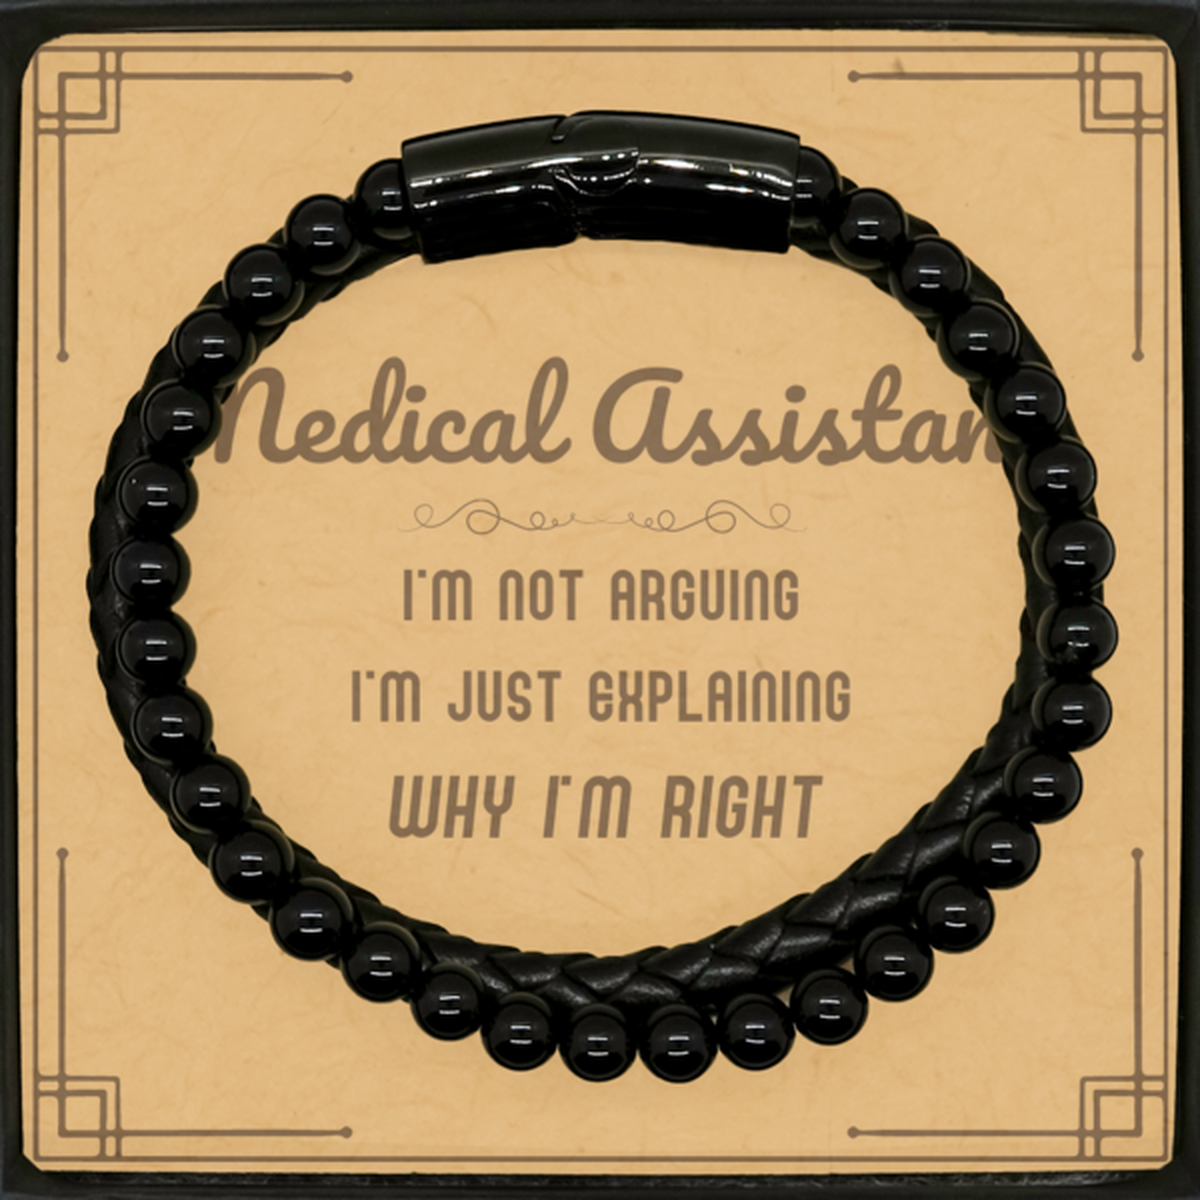 Medical Assistant I'm not Arguing. I'm Just Explaining Why I'm RIGHT Stone Leather Bracelets, Funny Saying Quote Medical Assistant Gifts For Medical Assistant Message Card Graduation Birthday Christmas Gifts for Men Women Coworker